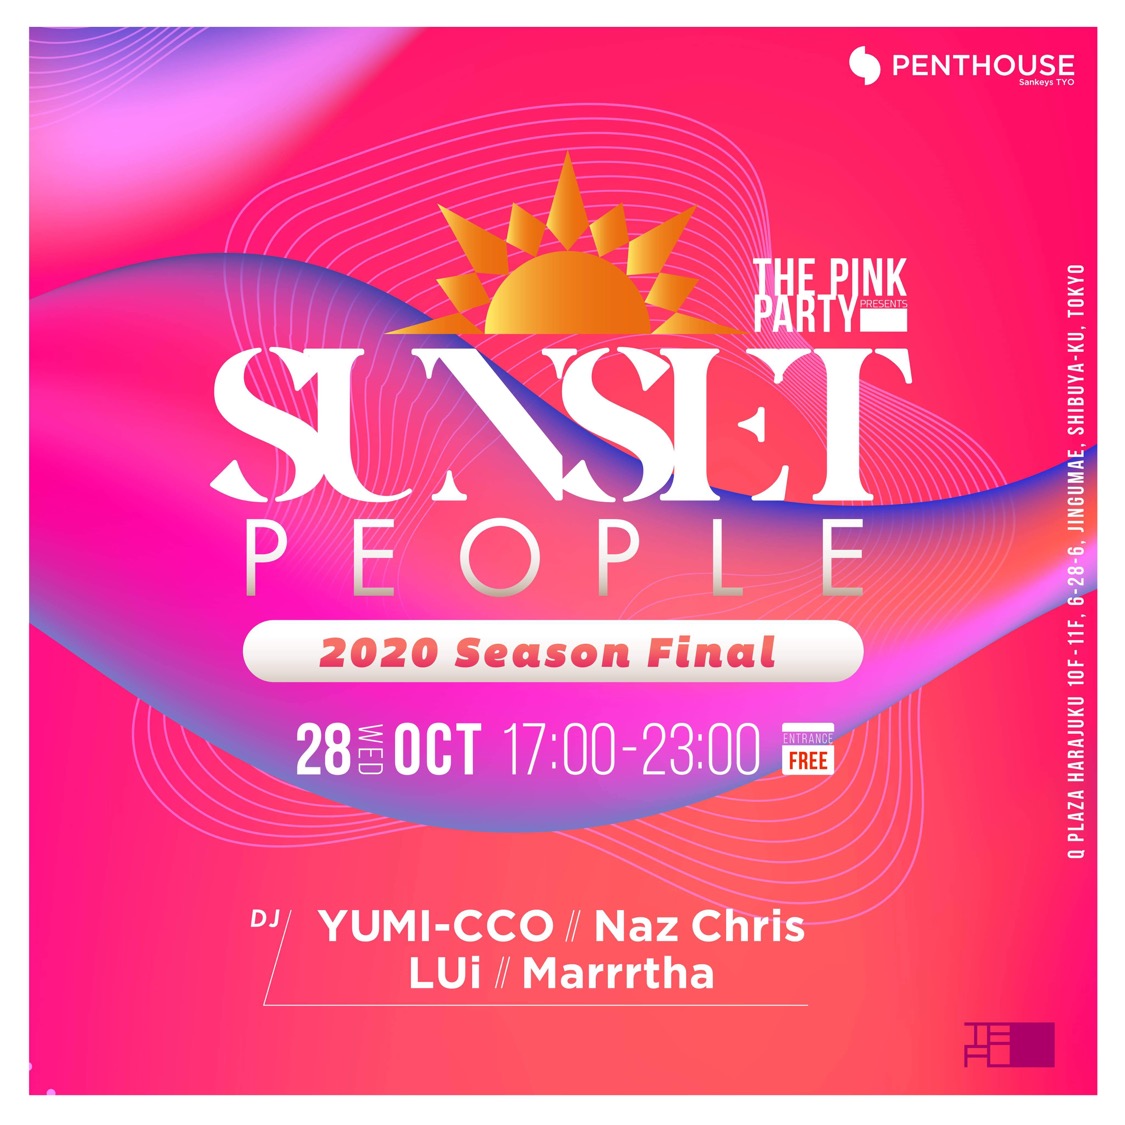 THE PINK PARTY PRESENTS SUNSET PEOPLE